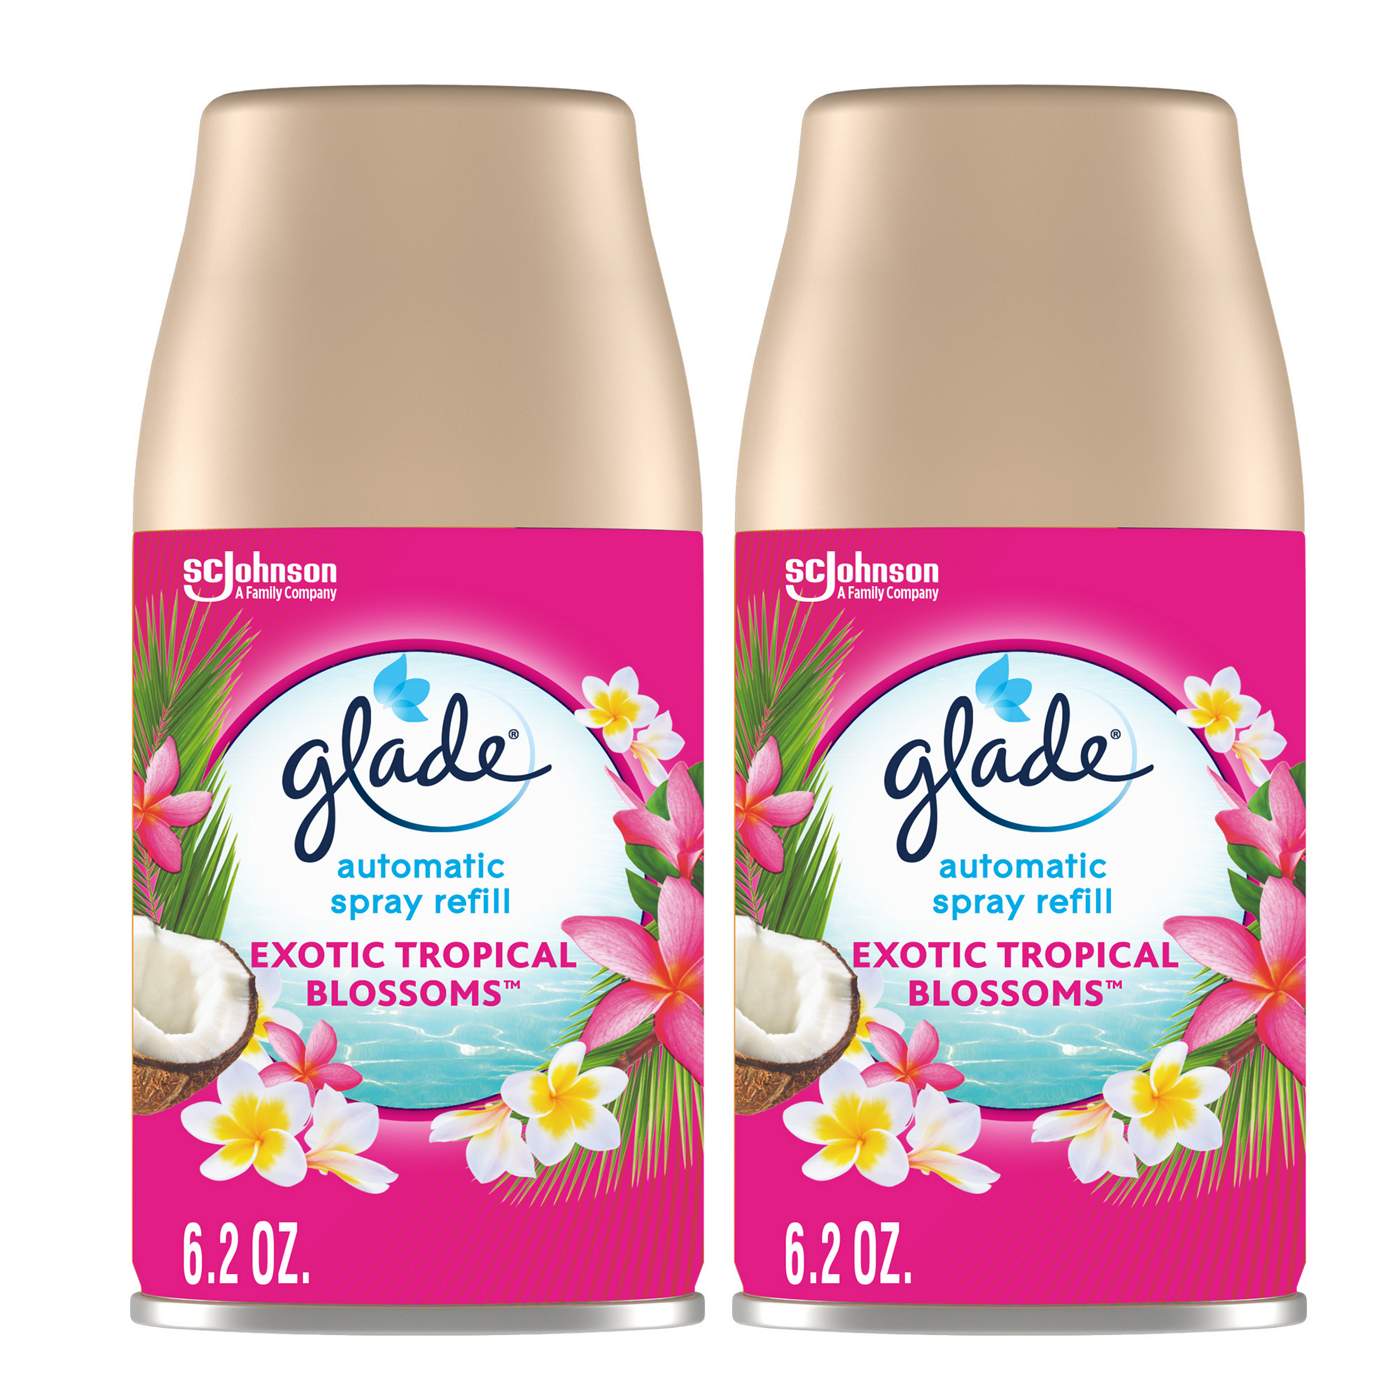 Glade Automatic Spray Refill, Value Pack - Exotic Tropical Blossoms; image 1 of 3